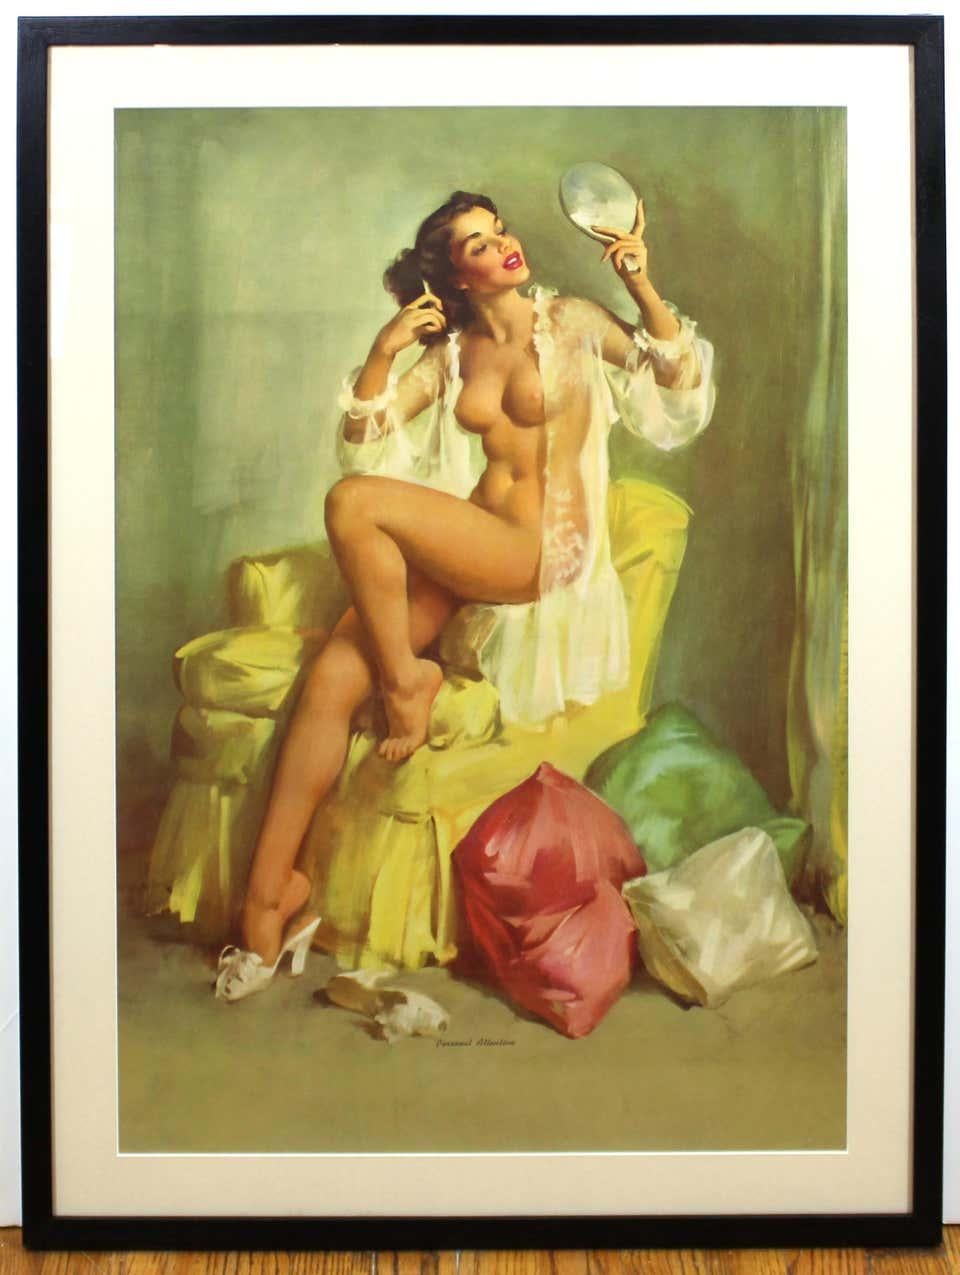 Nude Pin Up Girls Vintage Calendar Posters - Print by Gil Elvgren